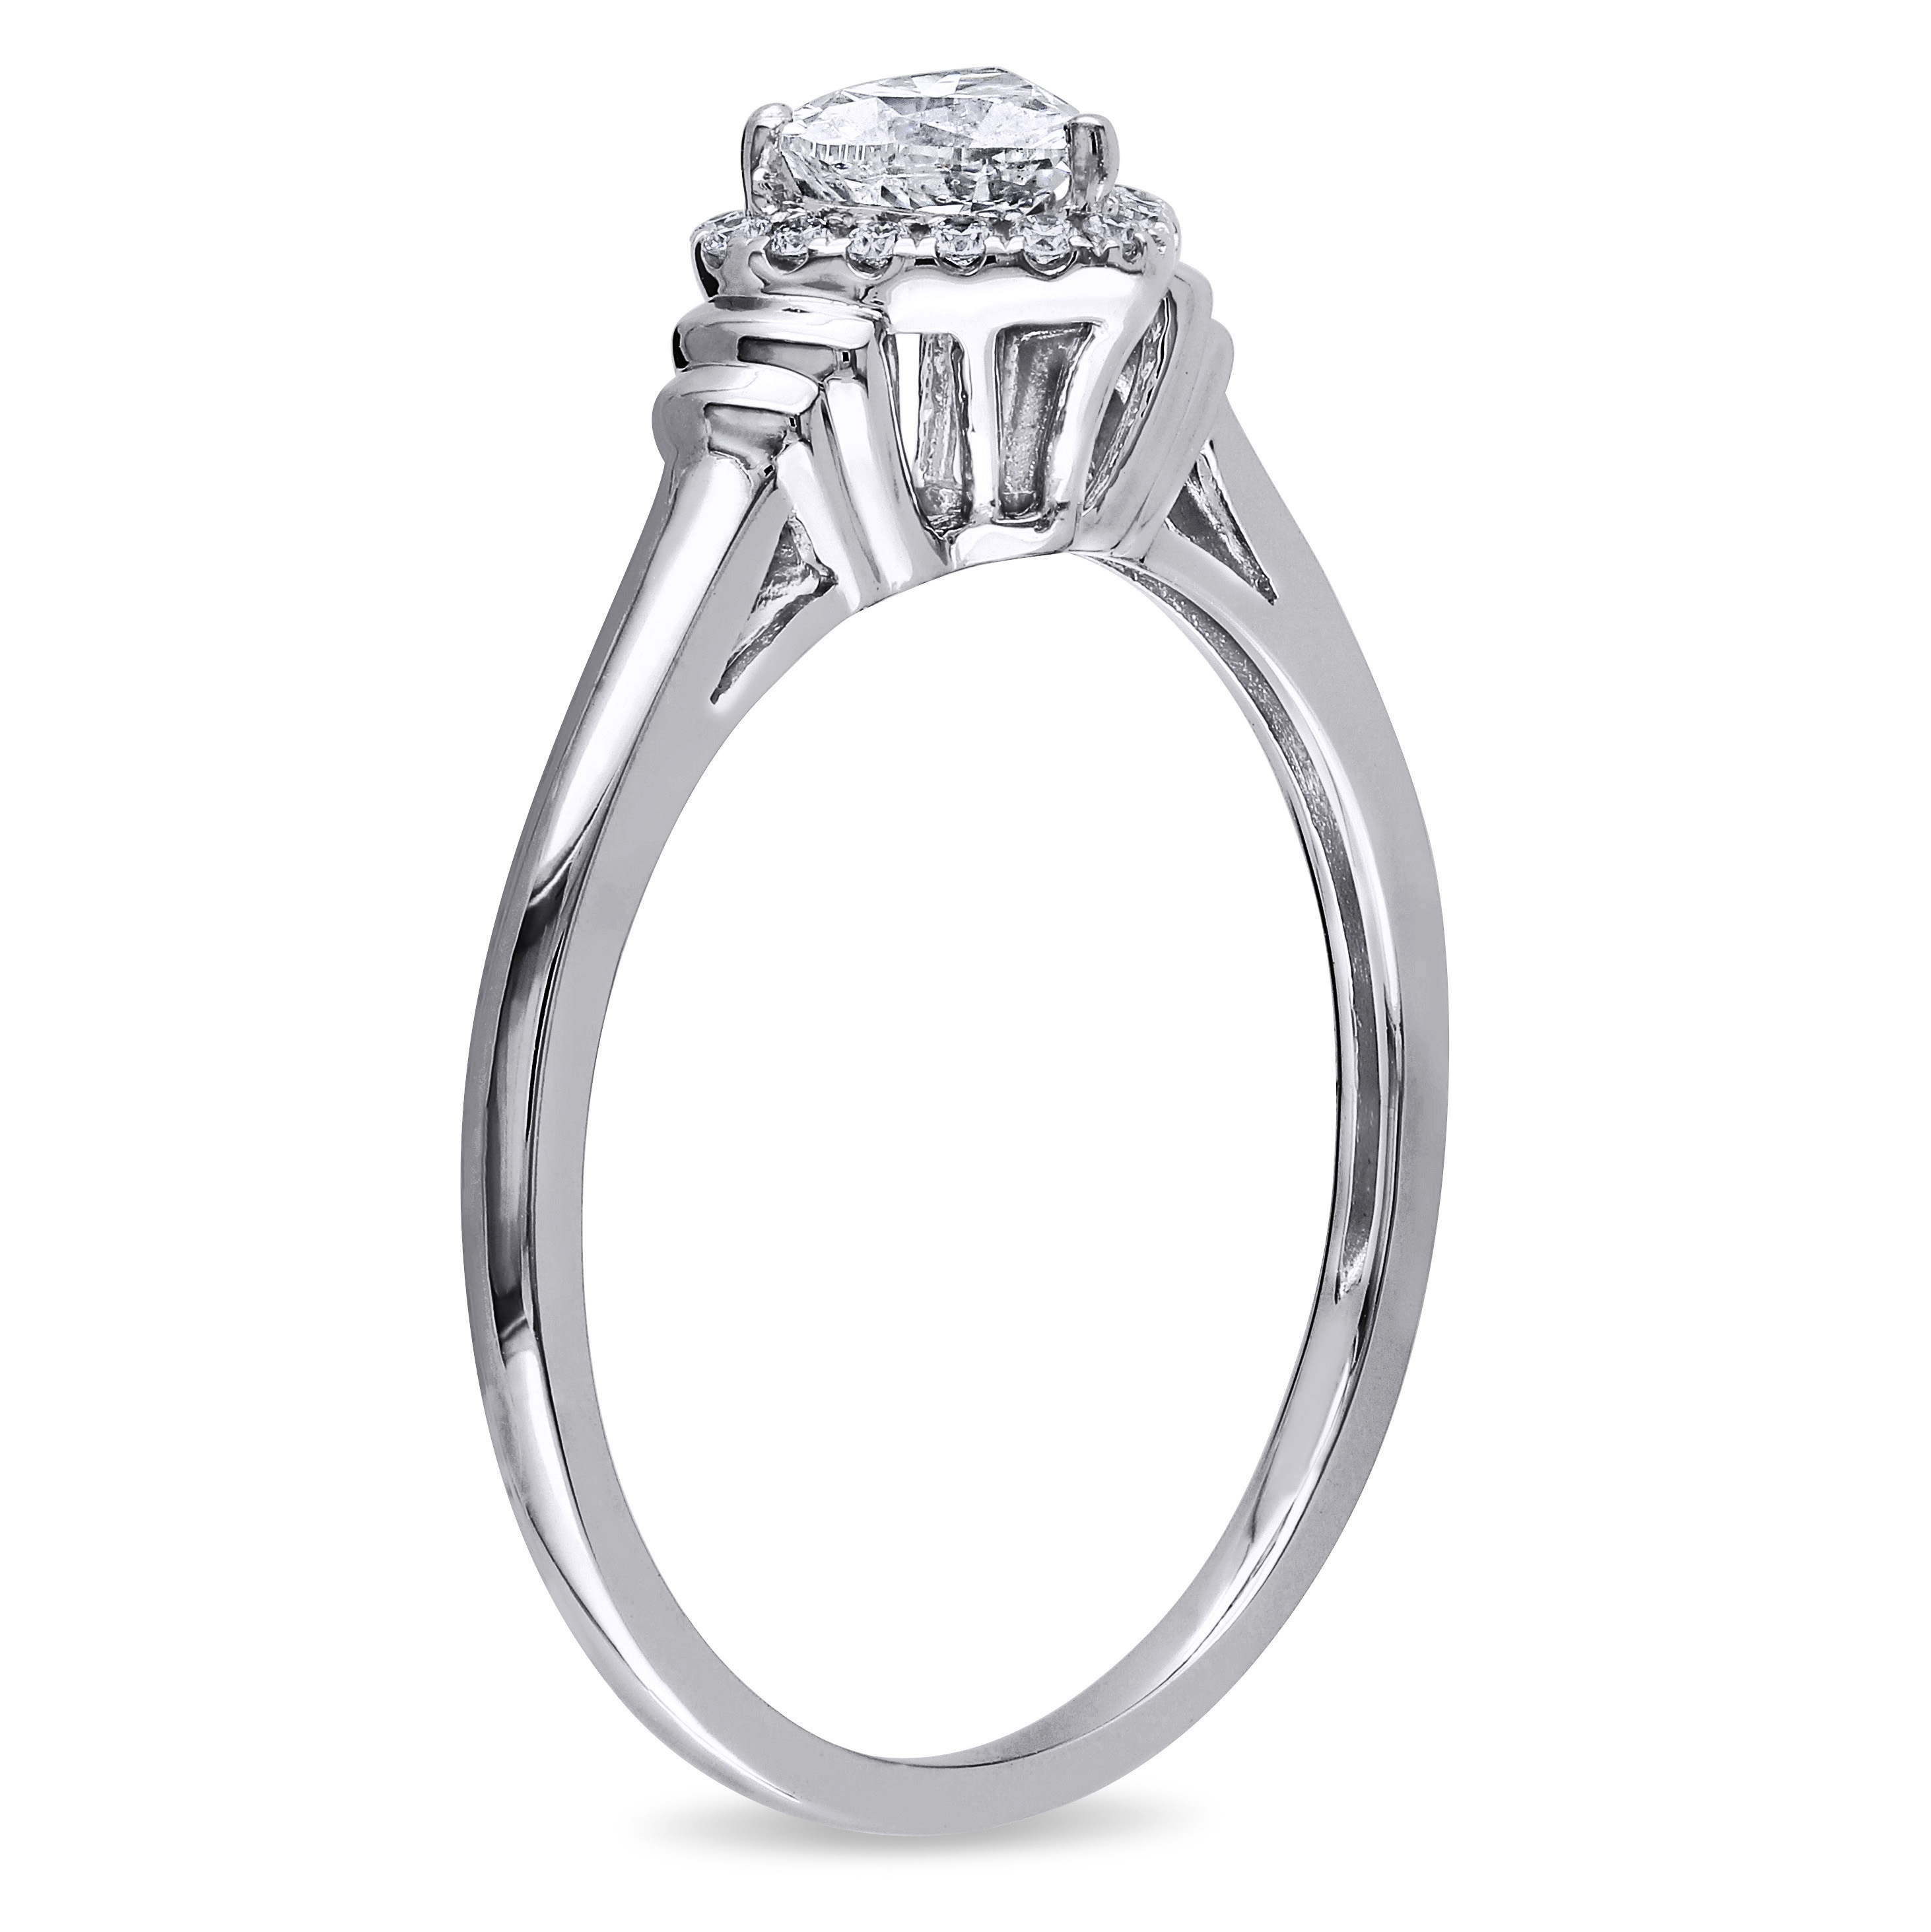 1/2 CT TW Halo Heart Diamond Engagement Ring in 14k White Gold